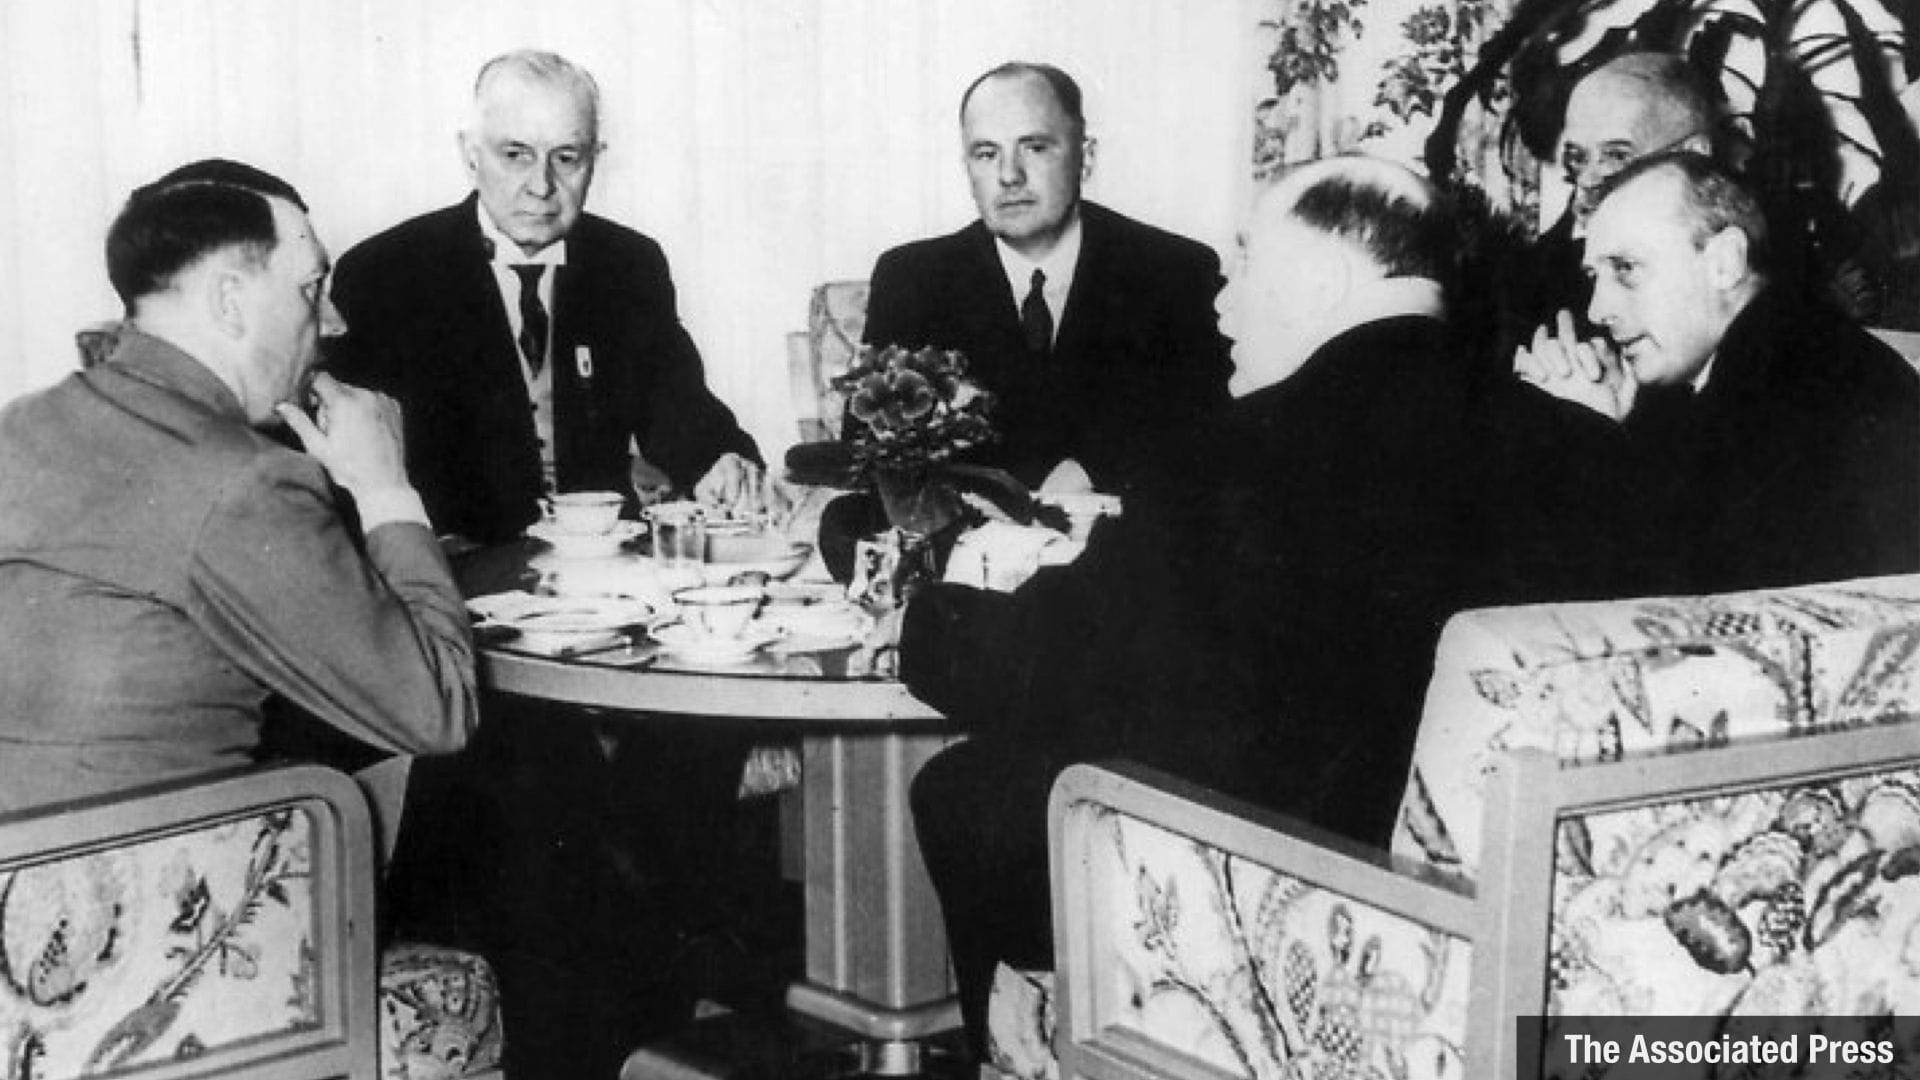 A black and white photo of Hitler meeting with Thomas Watson (CEO of IBM) and other business men around a table with an expensive looking tea set placed on it